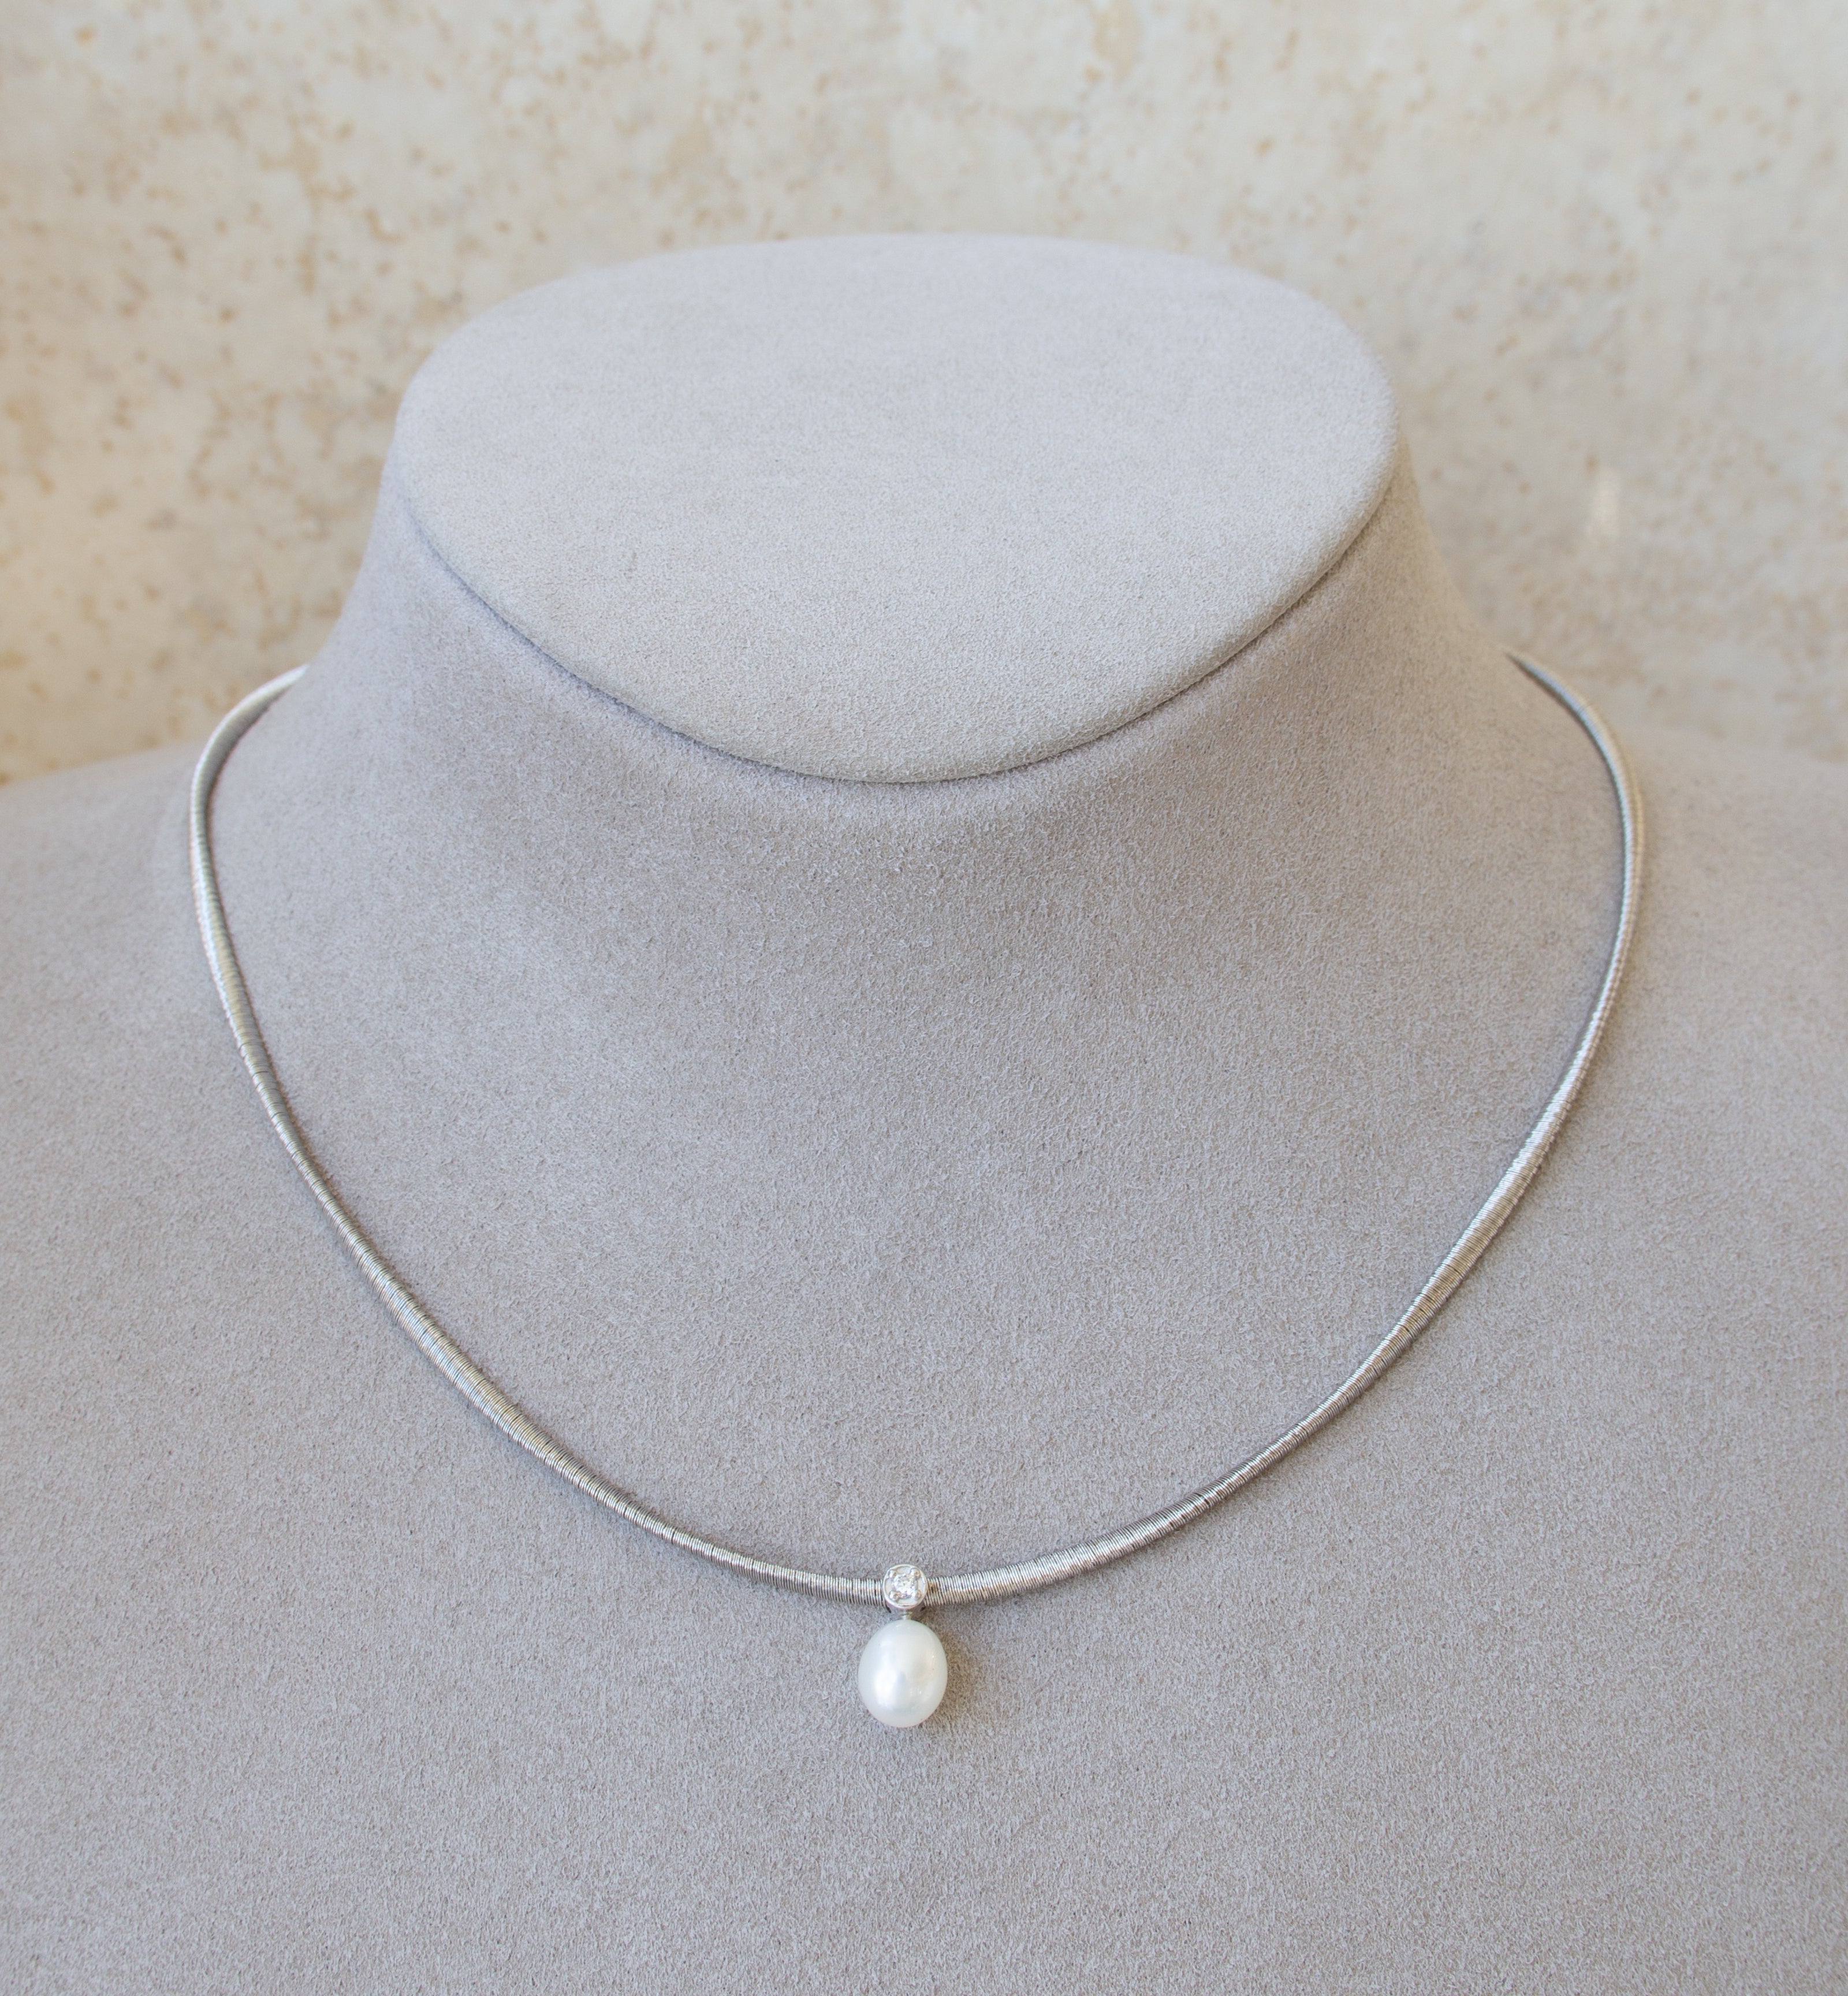 Silver 925 Twisted Necklace with Pearl & Cubic Zircon Stone